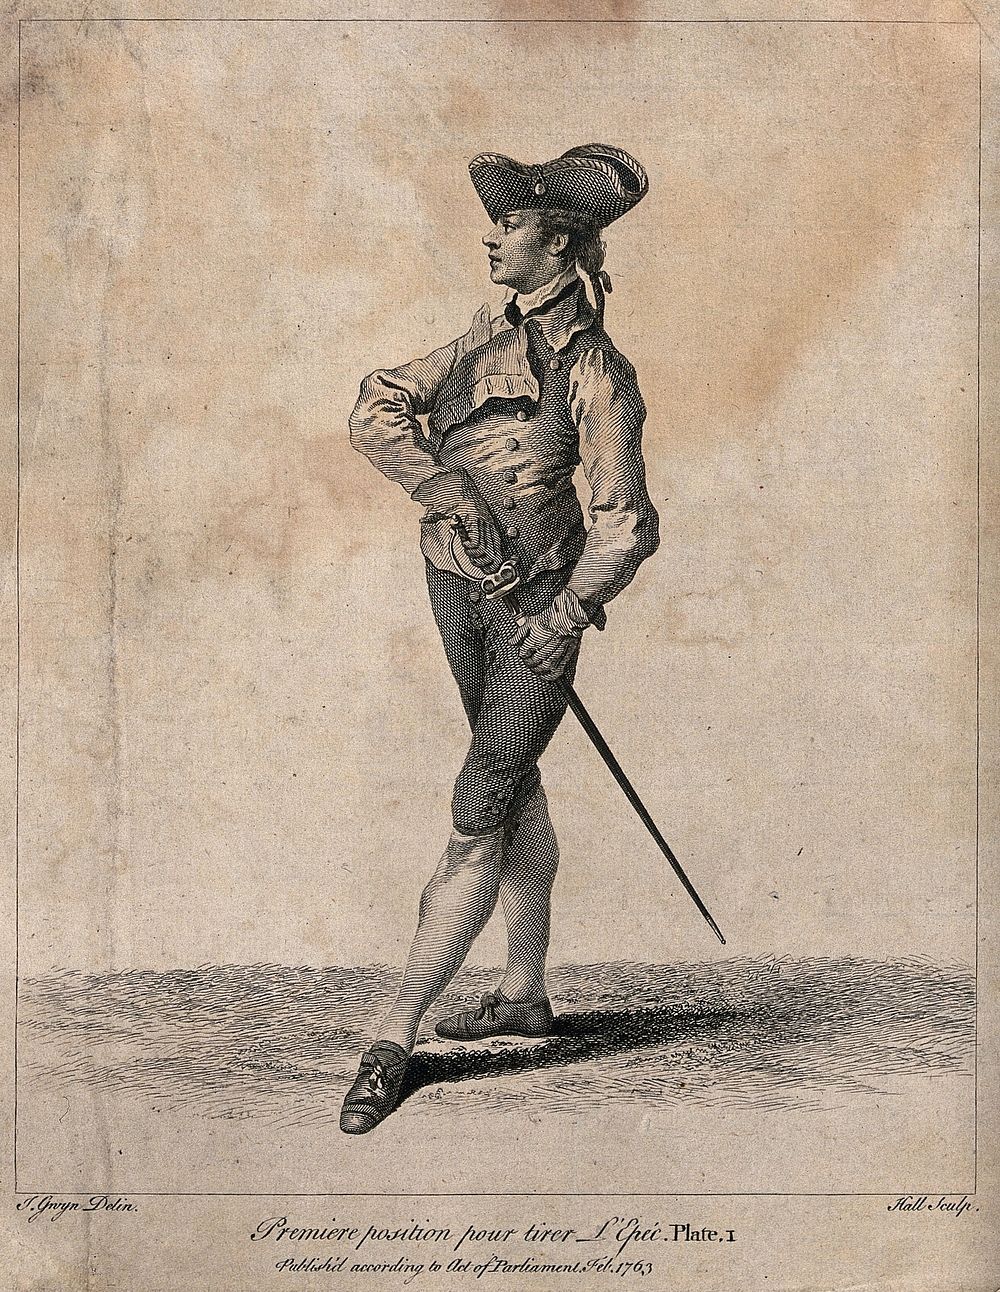 Fencing: a man is standing in position with his hand on the sword at his side. Engraving by Hall after J. Gwyn.